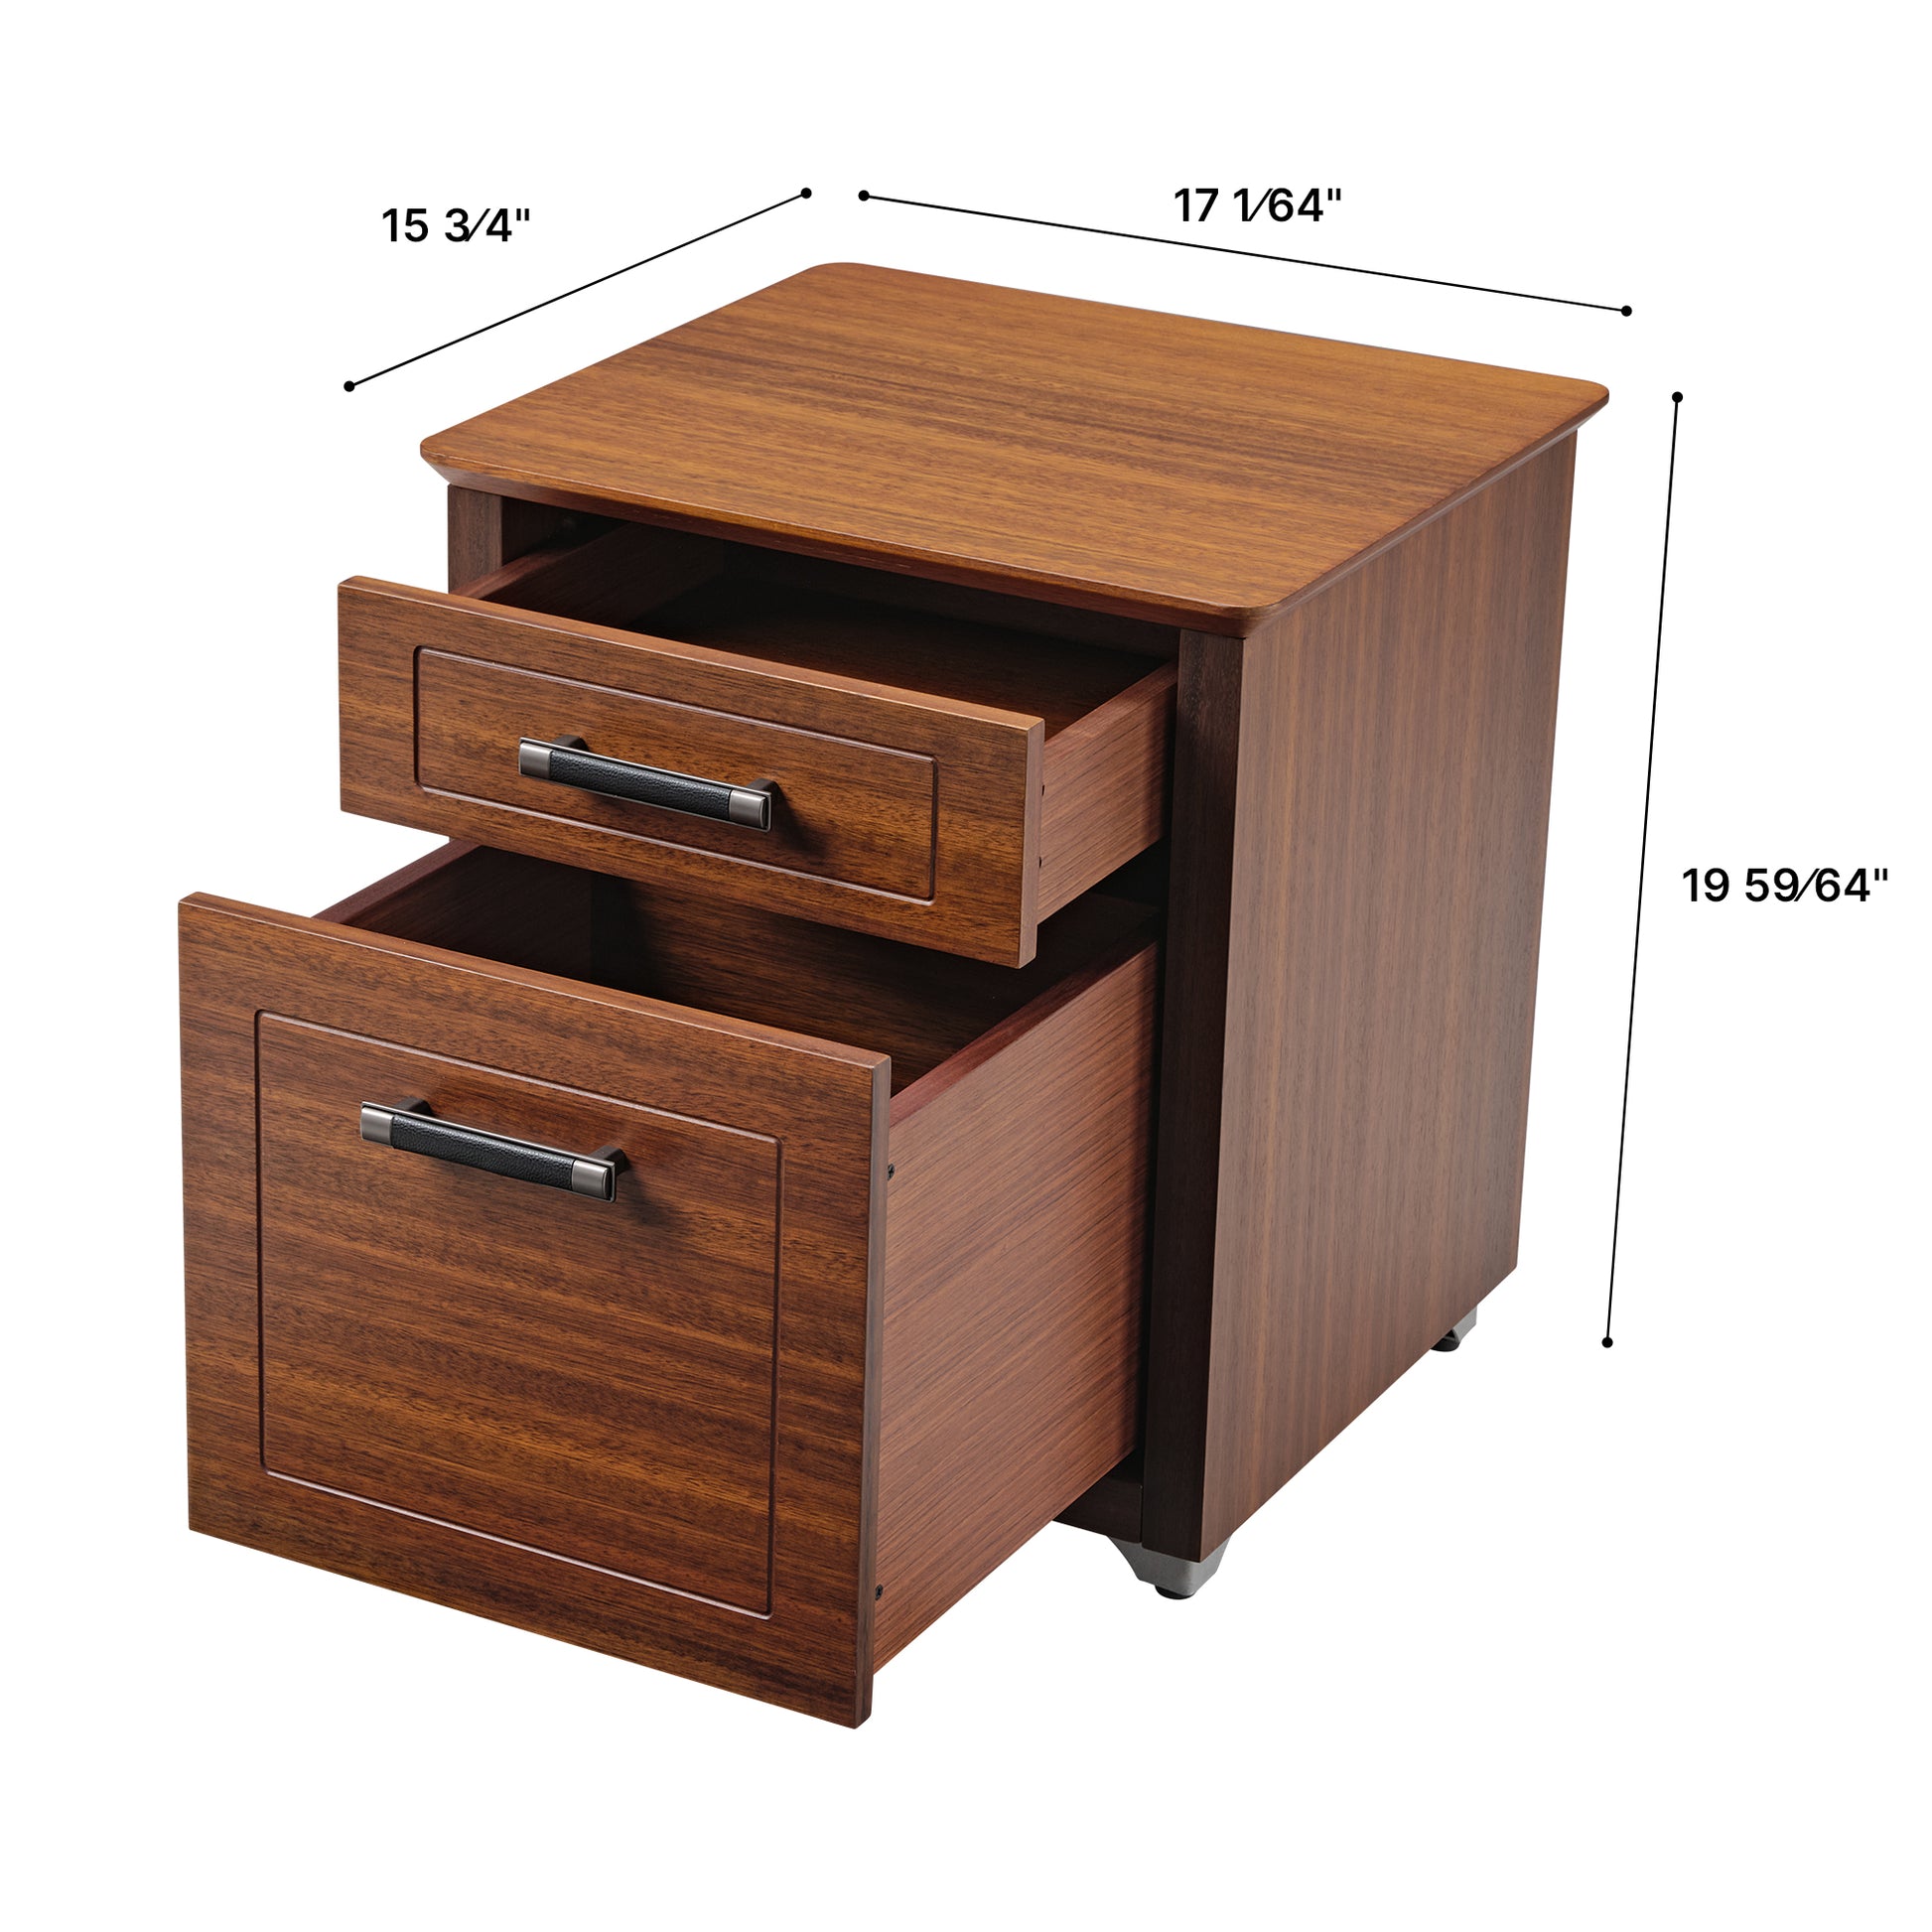 Executive Ark 19 inch closed file storage cabinet with walnut finish and sturdy metal legs product dimensions